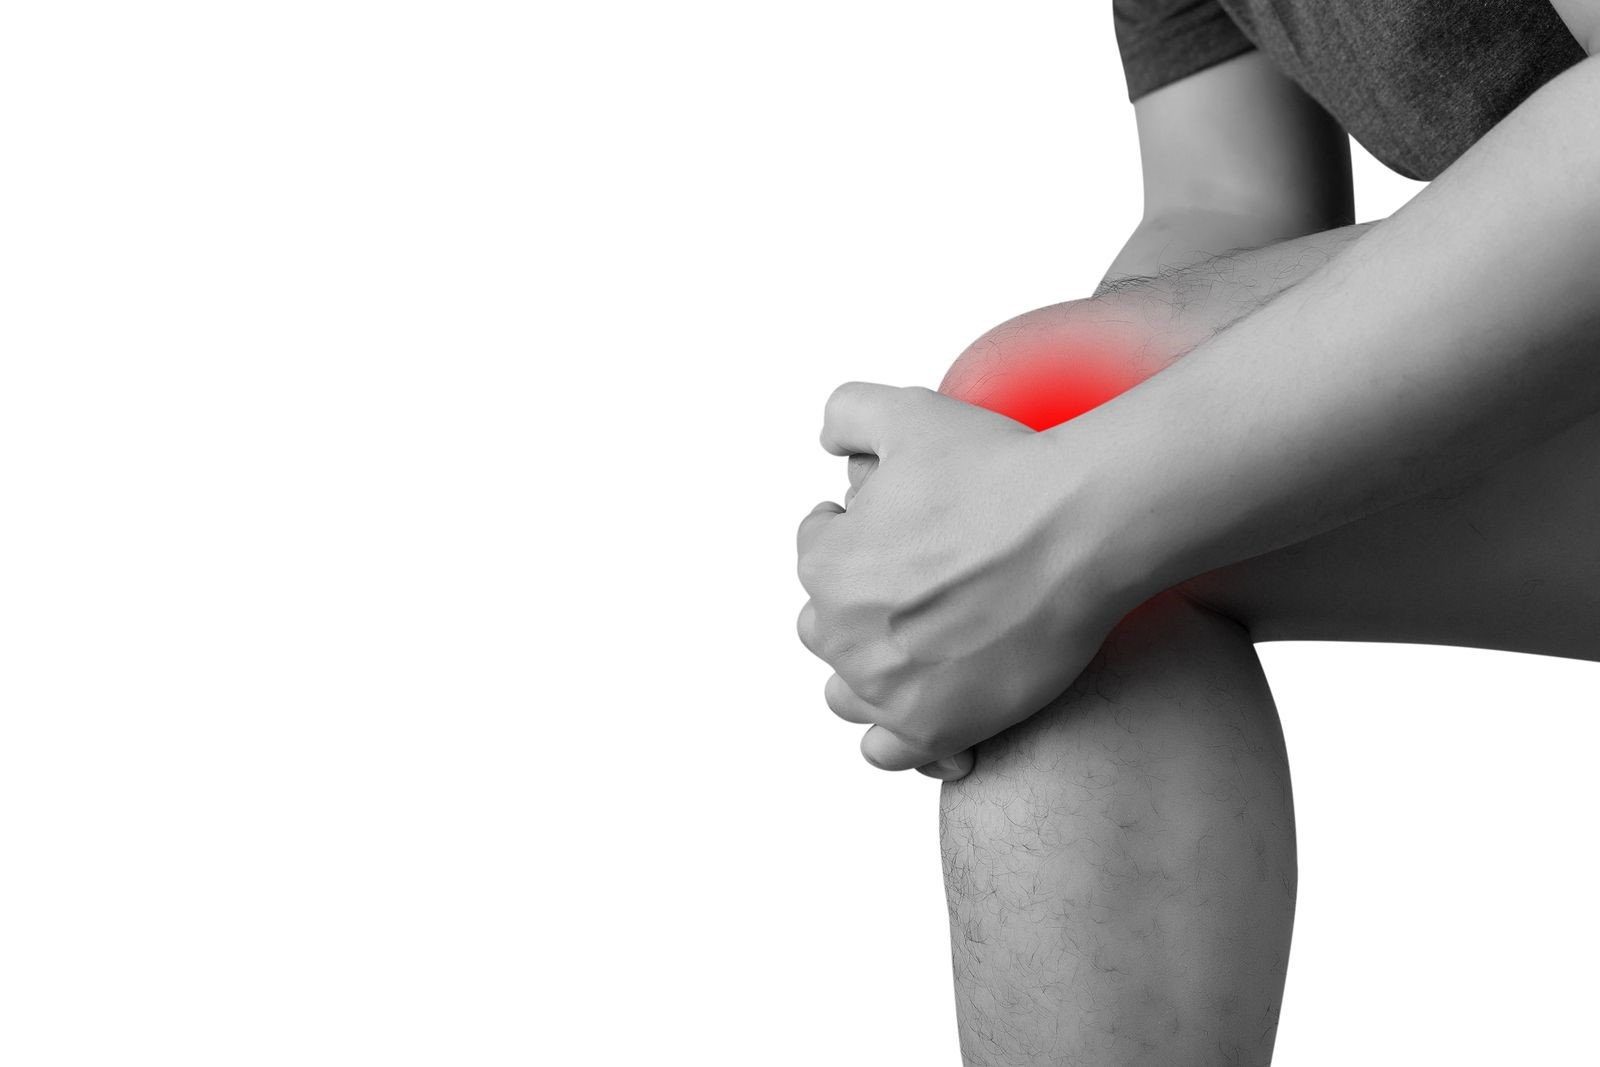 Stem Cell treatment for sports injuries and back and joint pain